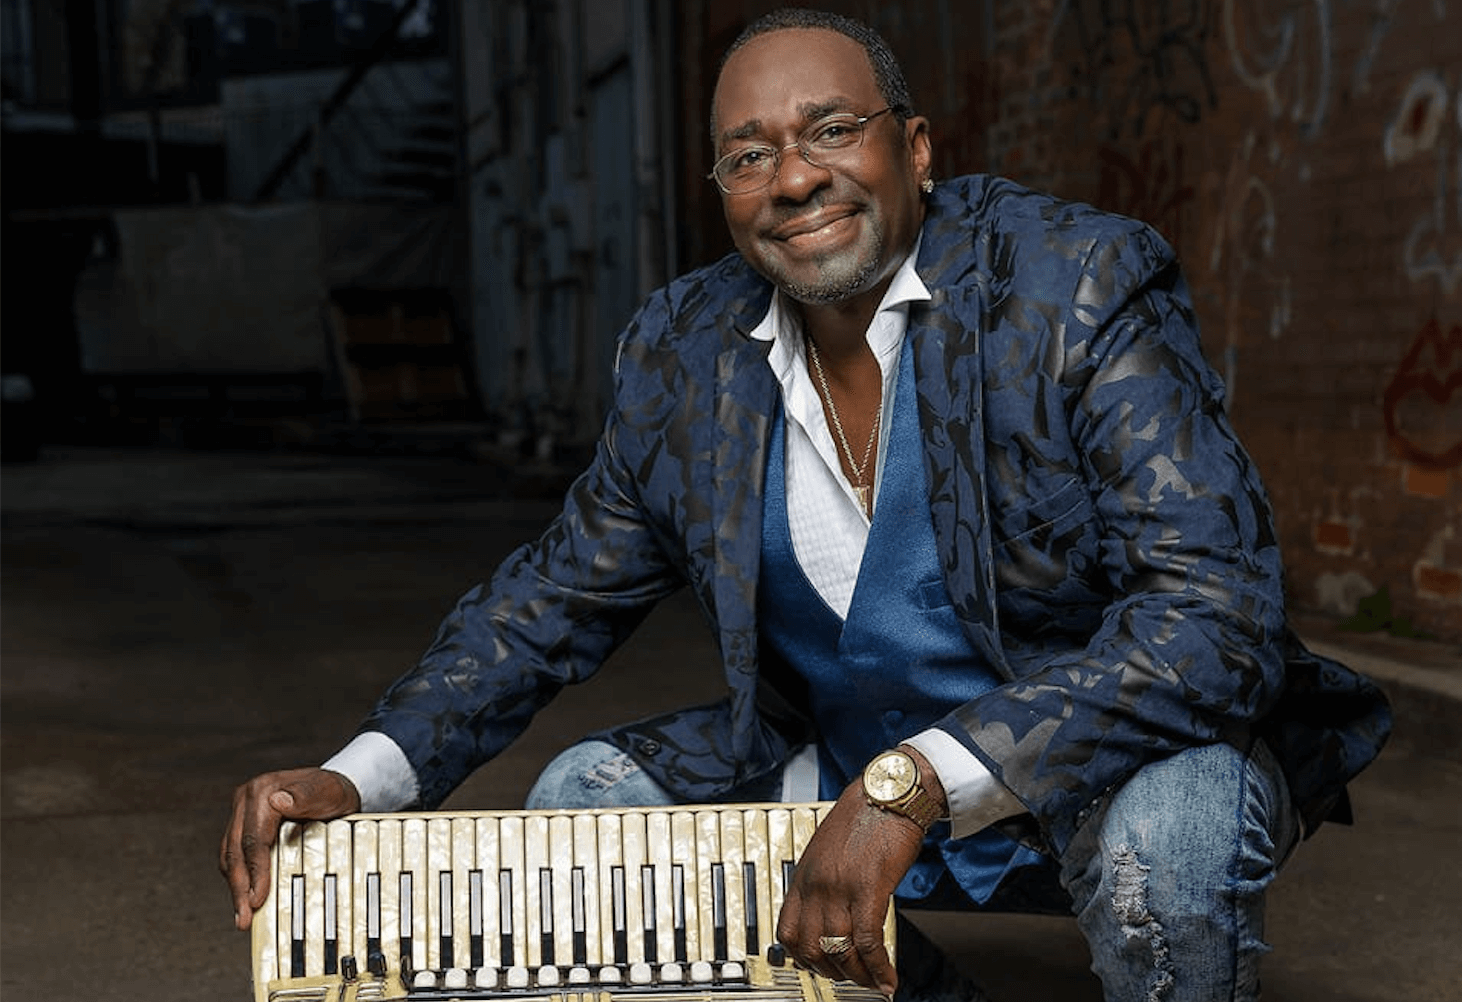 Buckwheat Zydeco Jr. Carries on Dads Louisiana Traditions  American Blues Scene [Video]